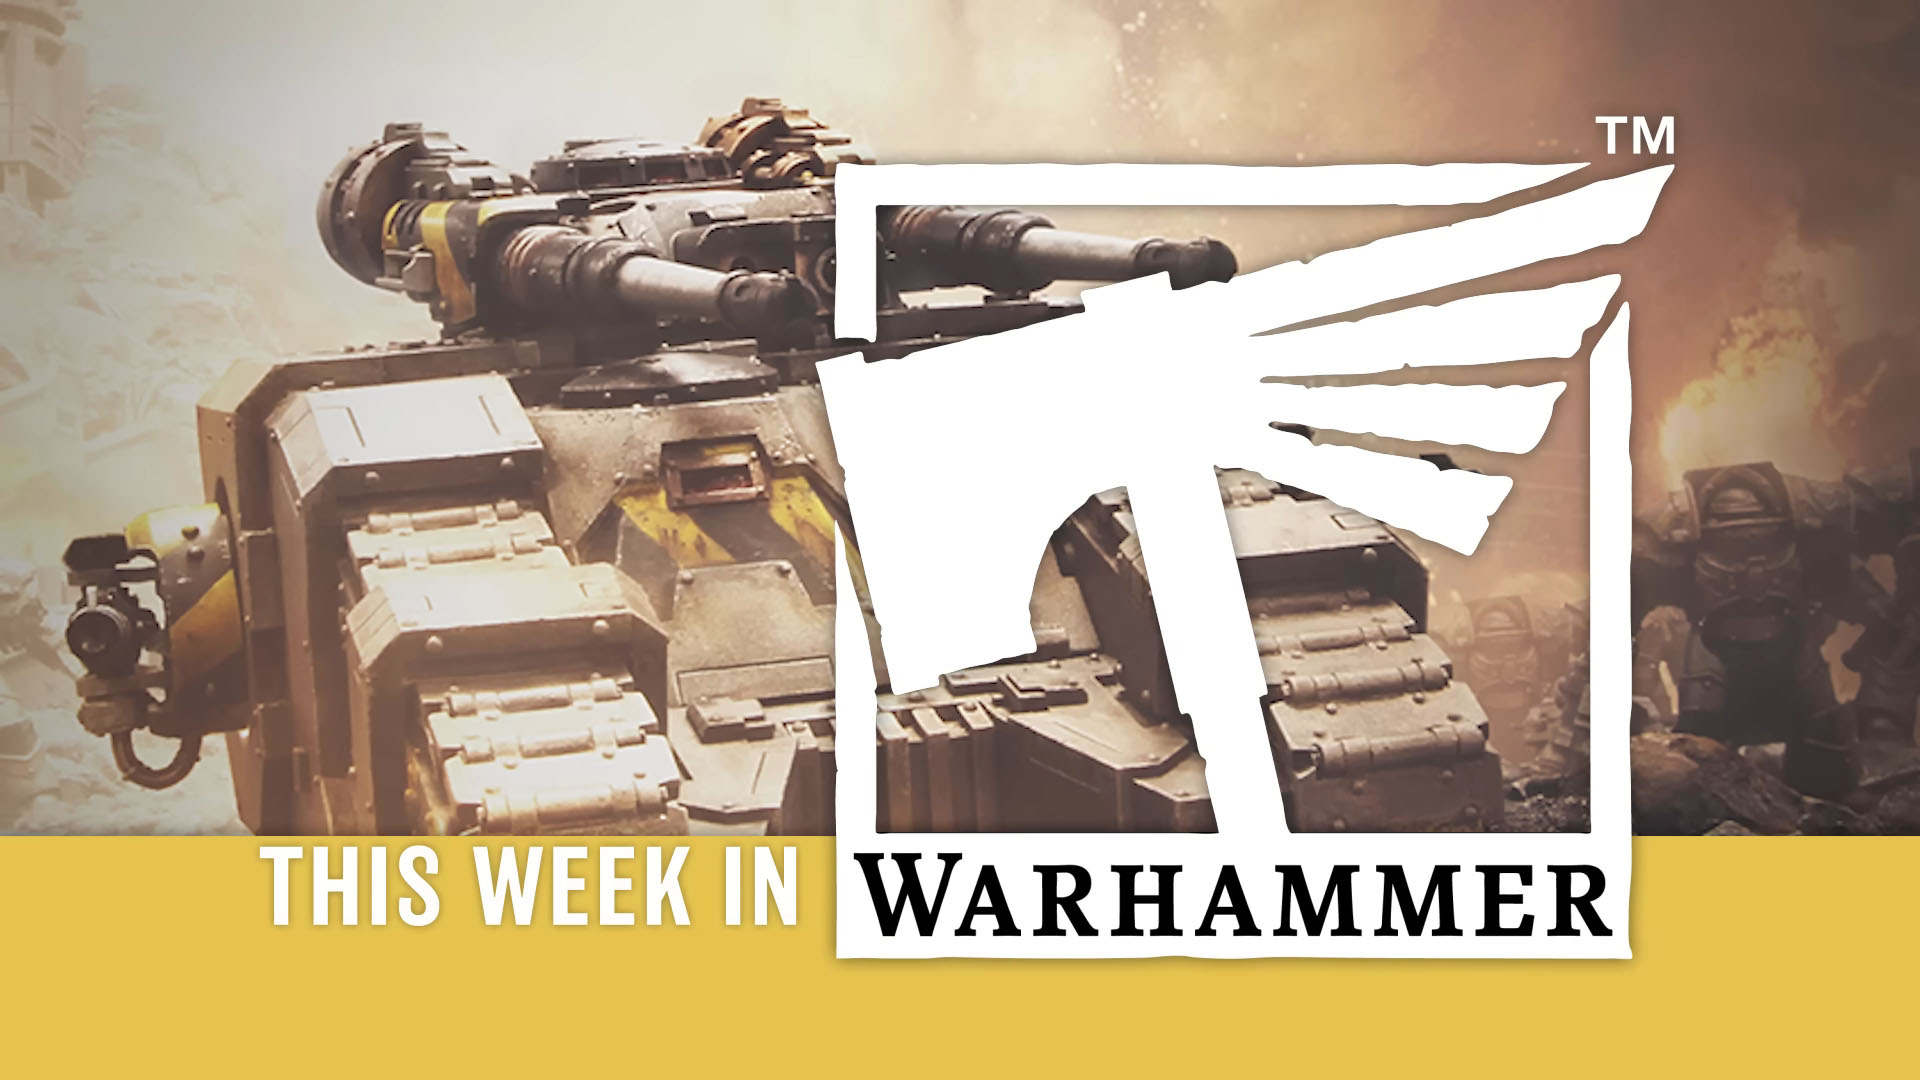 This week in Warhammer – assemble loads of new miniatures for your Horus Heresy Legion